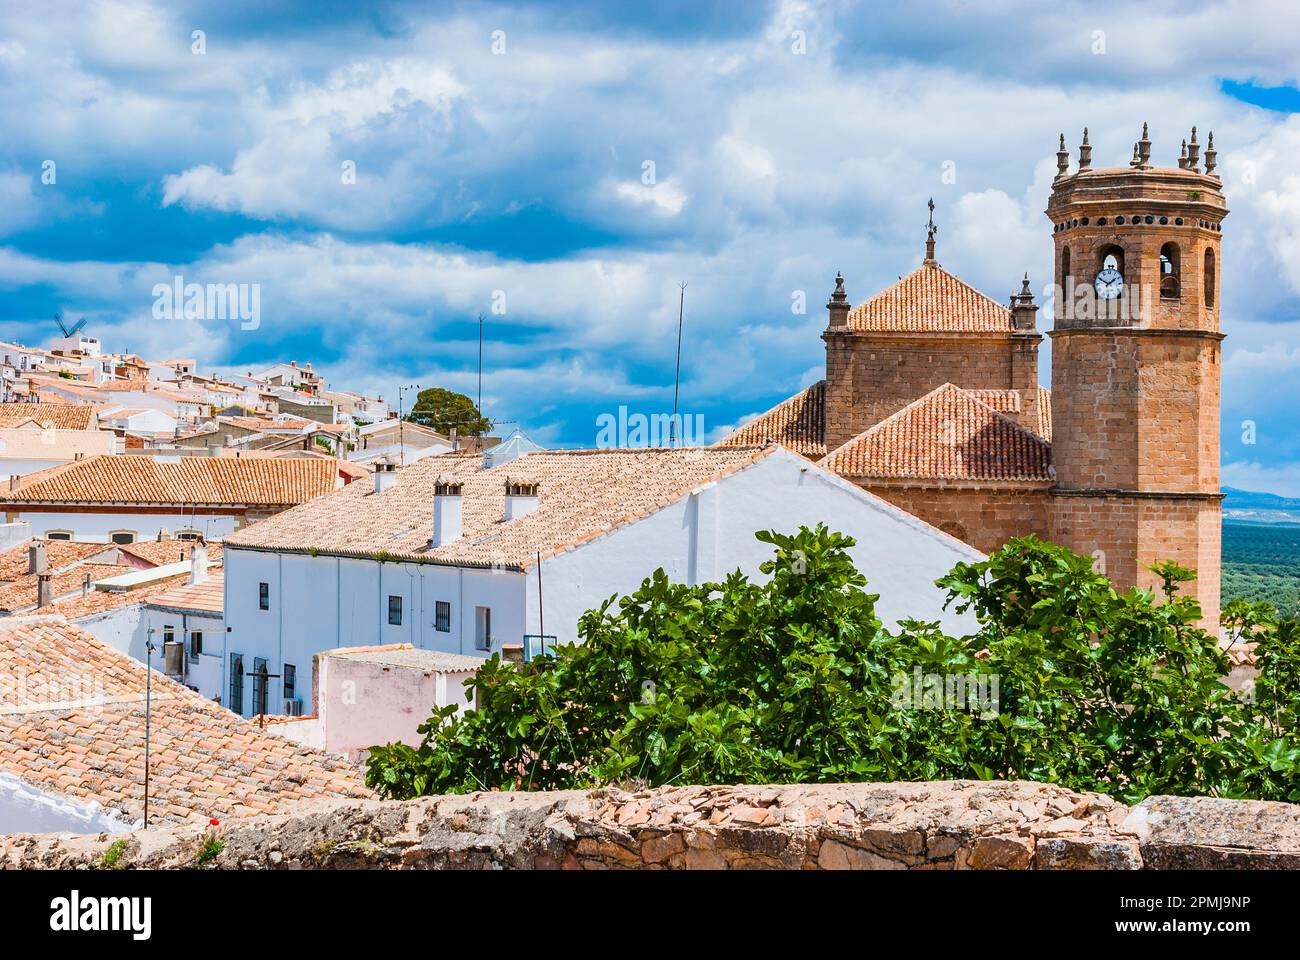 Church of San Mateo stands out on the roofs of the town. Baños de la Encina, Jaén, Andalucía, Spain, Europe Stock Photo